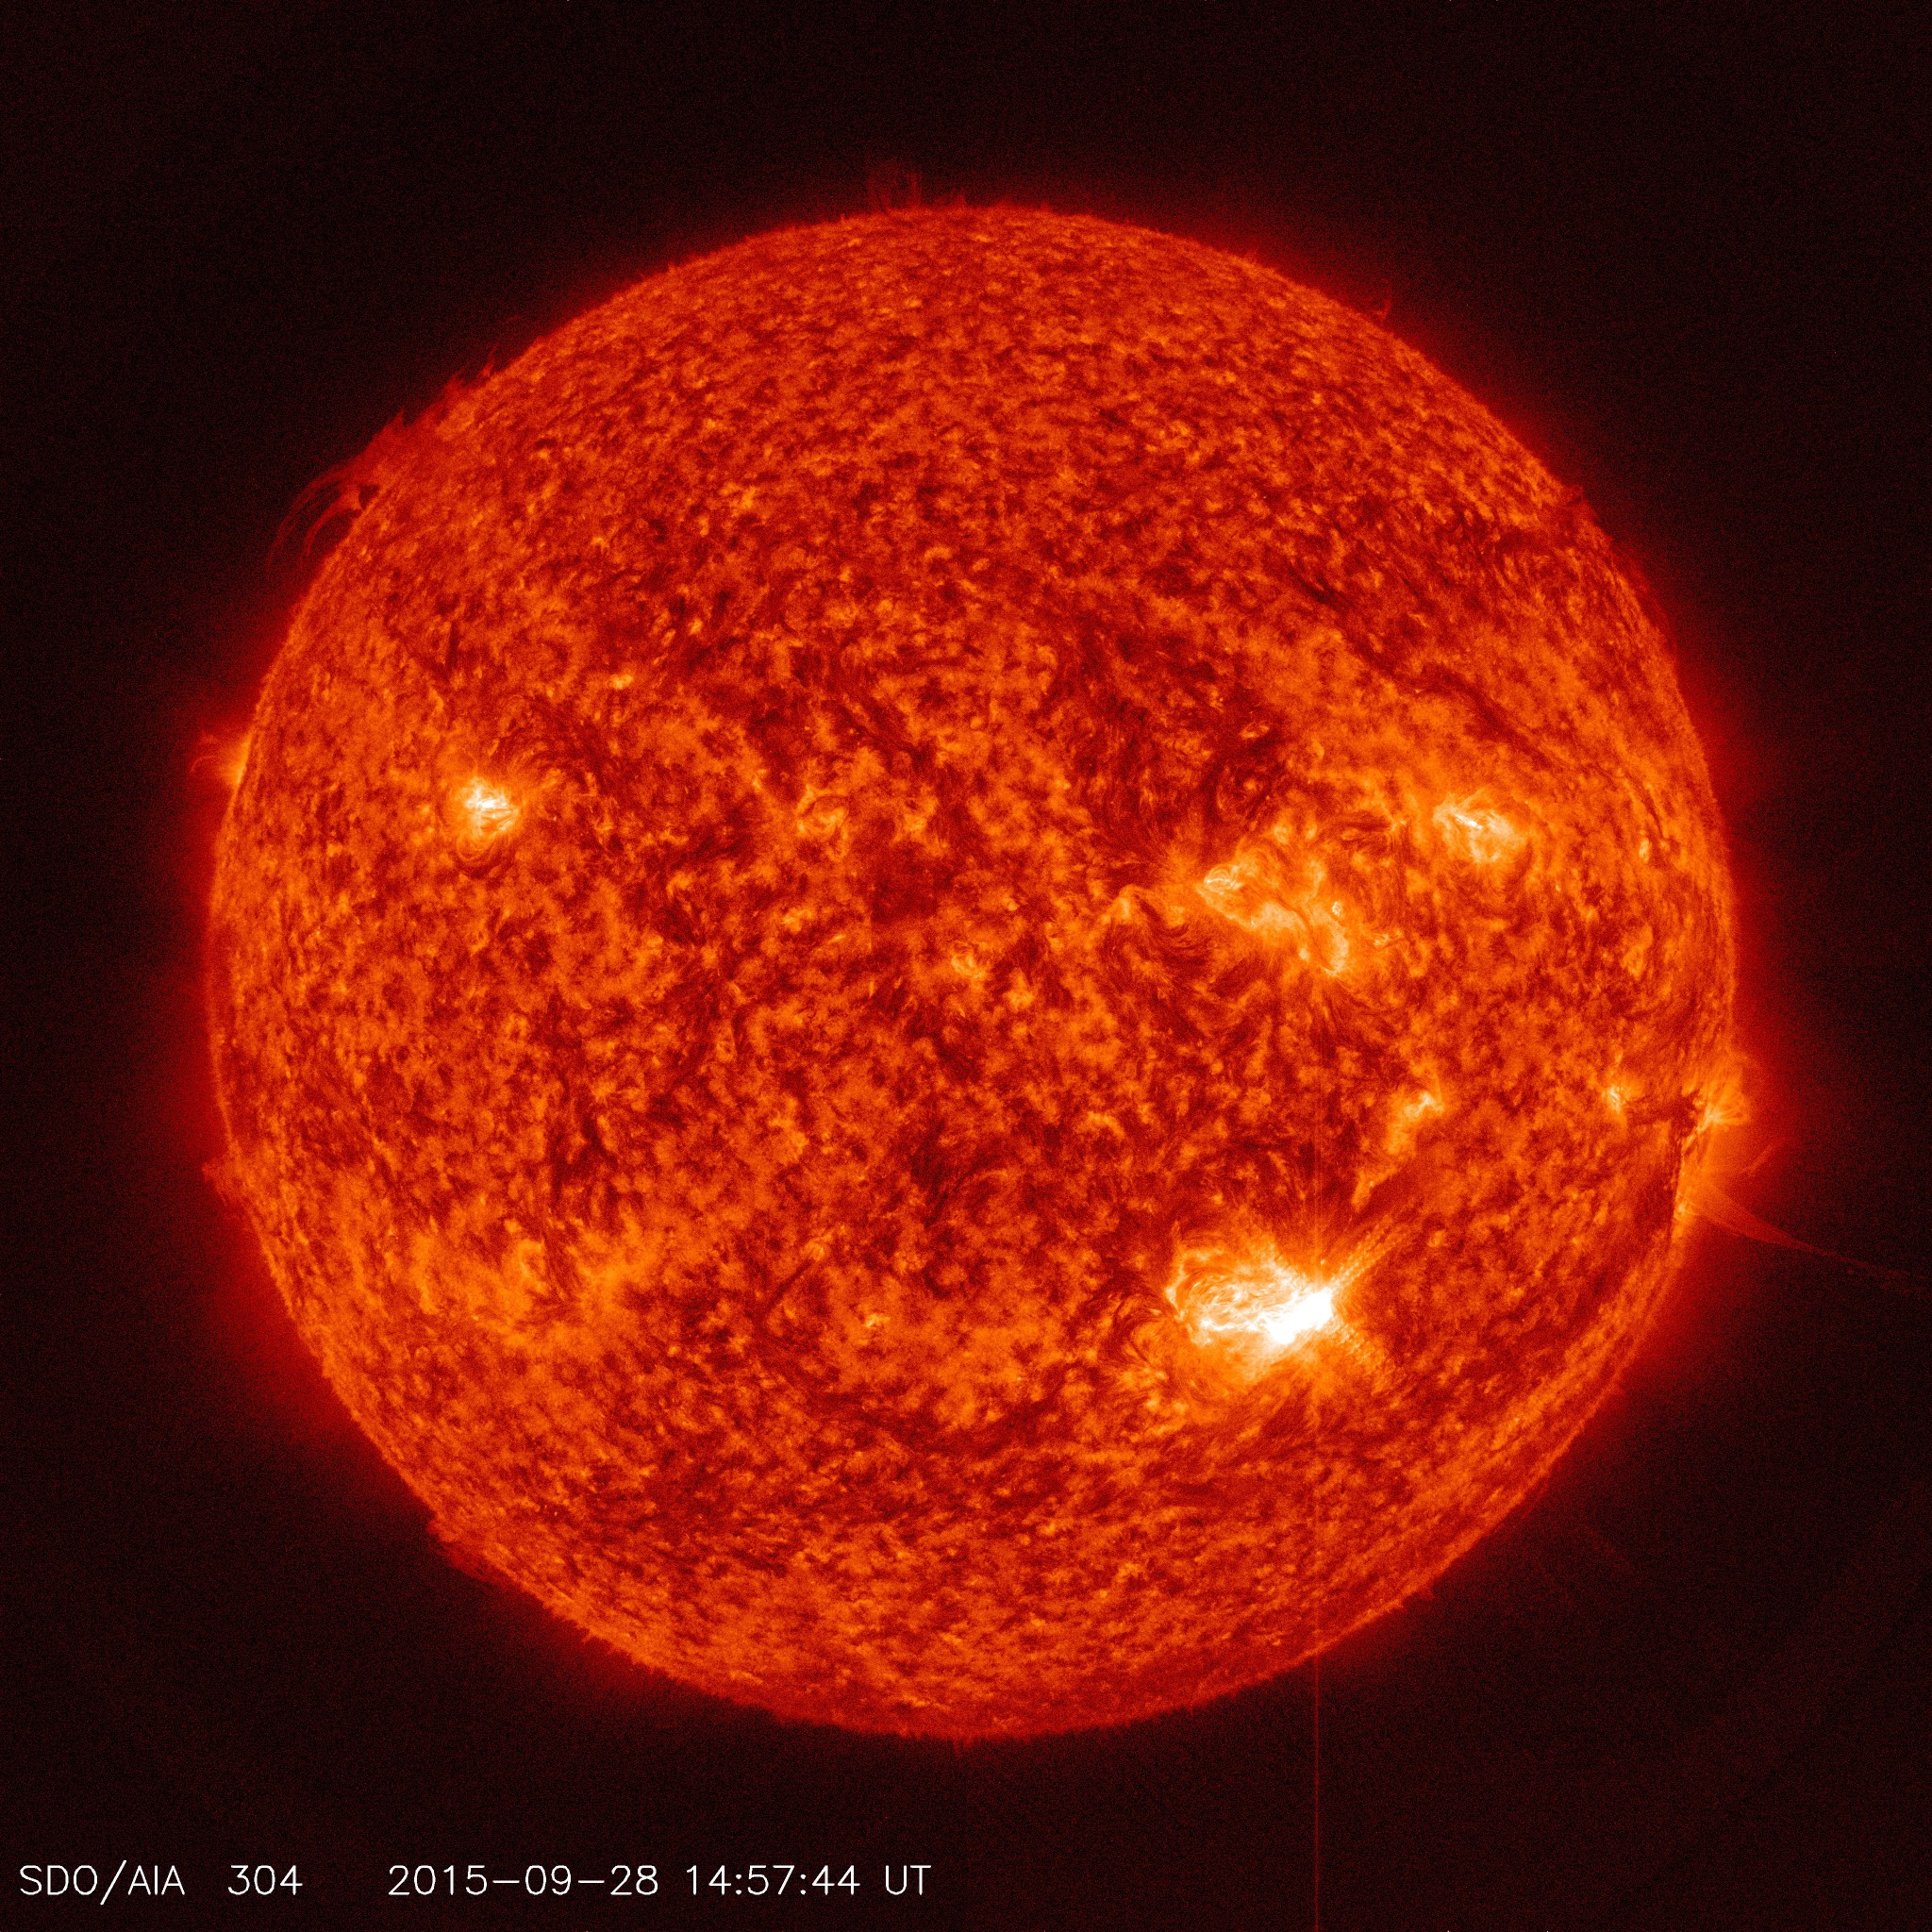 full disc image of the sun with flare at lower right